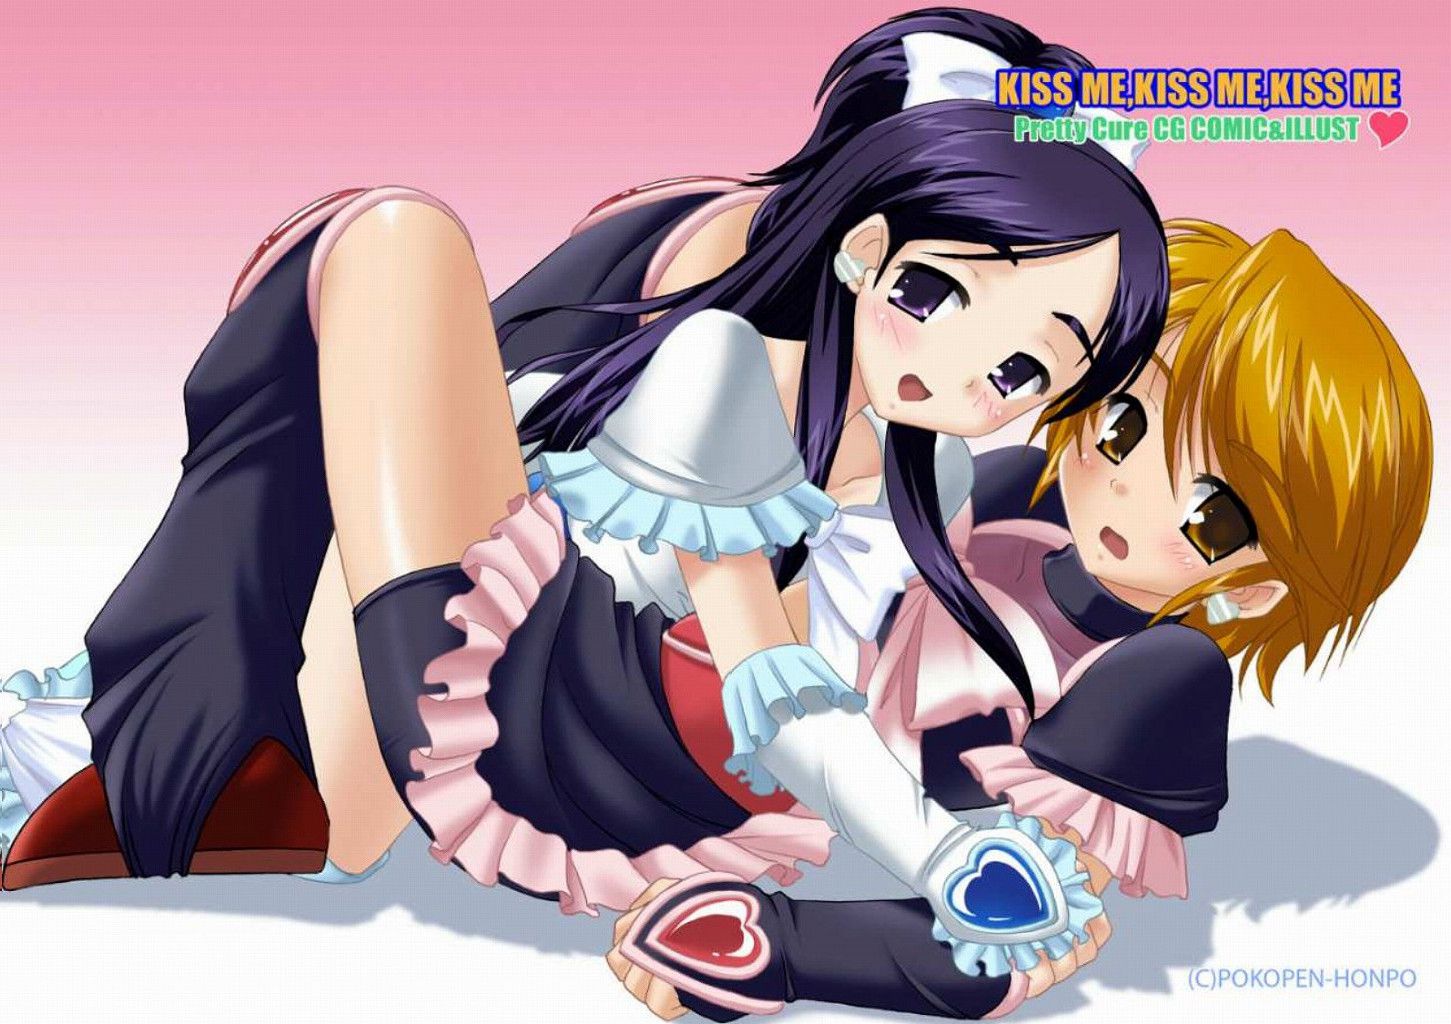 Pretty cure charm examined in erotic pictures 8